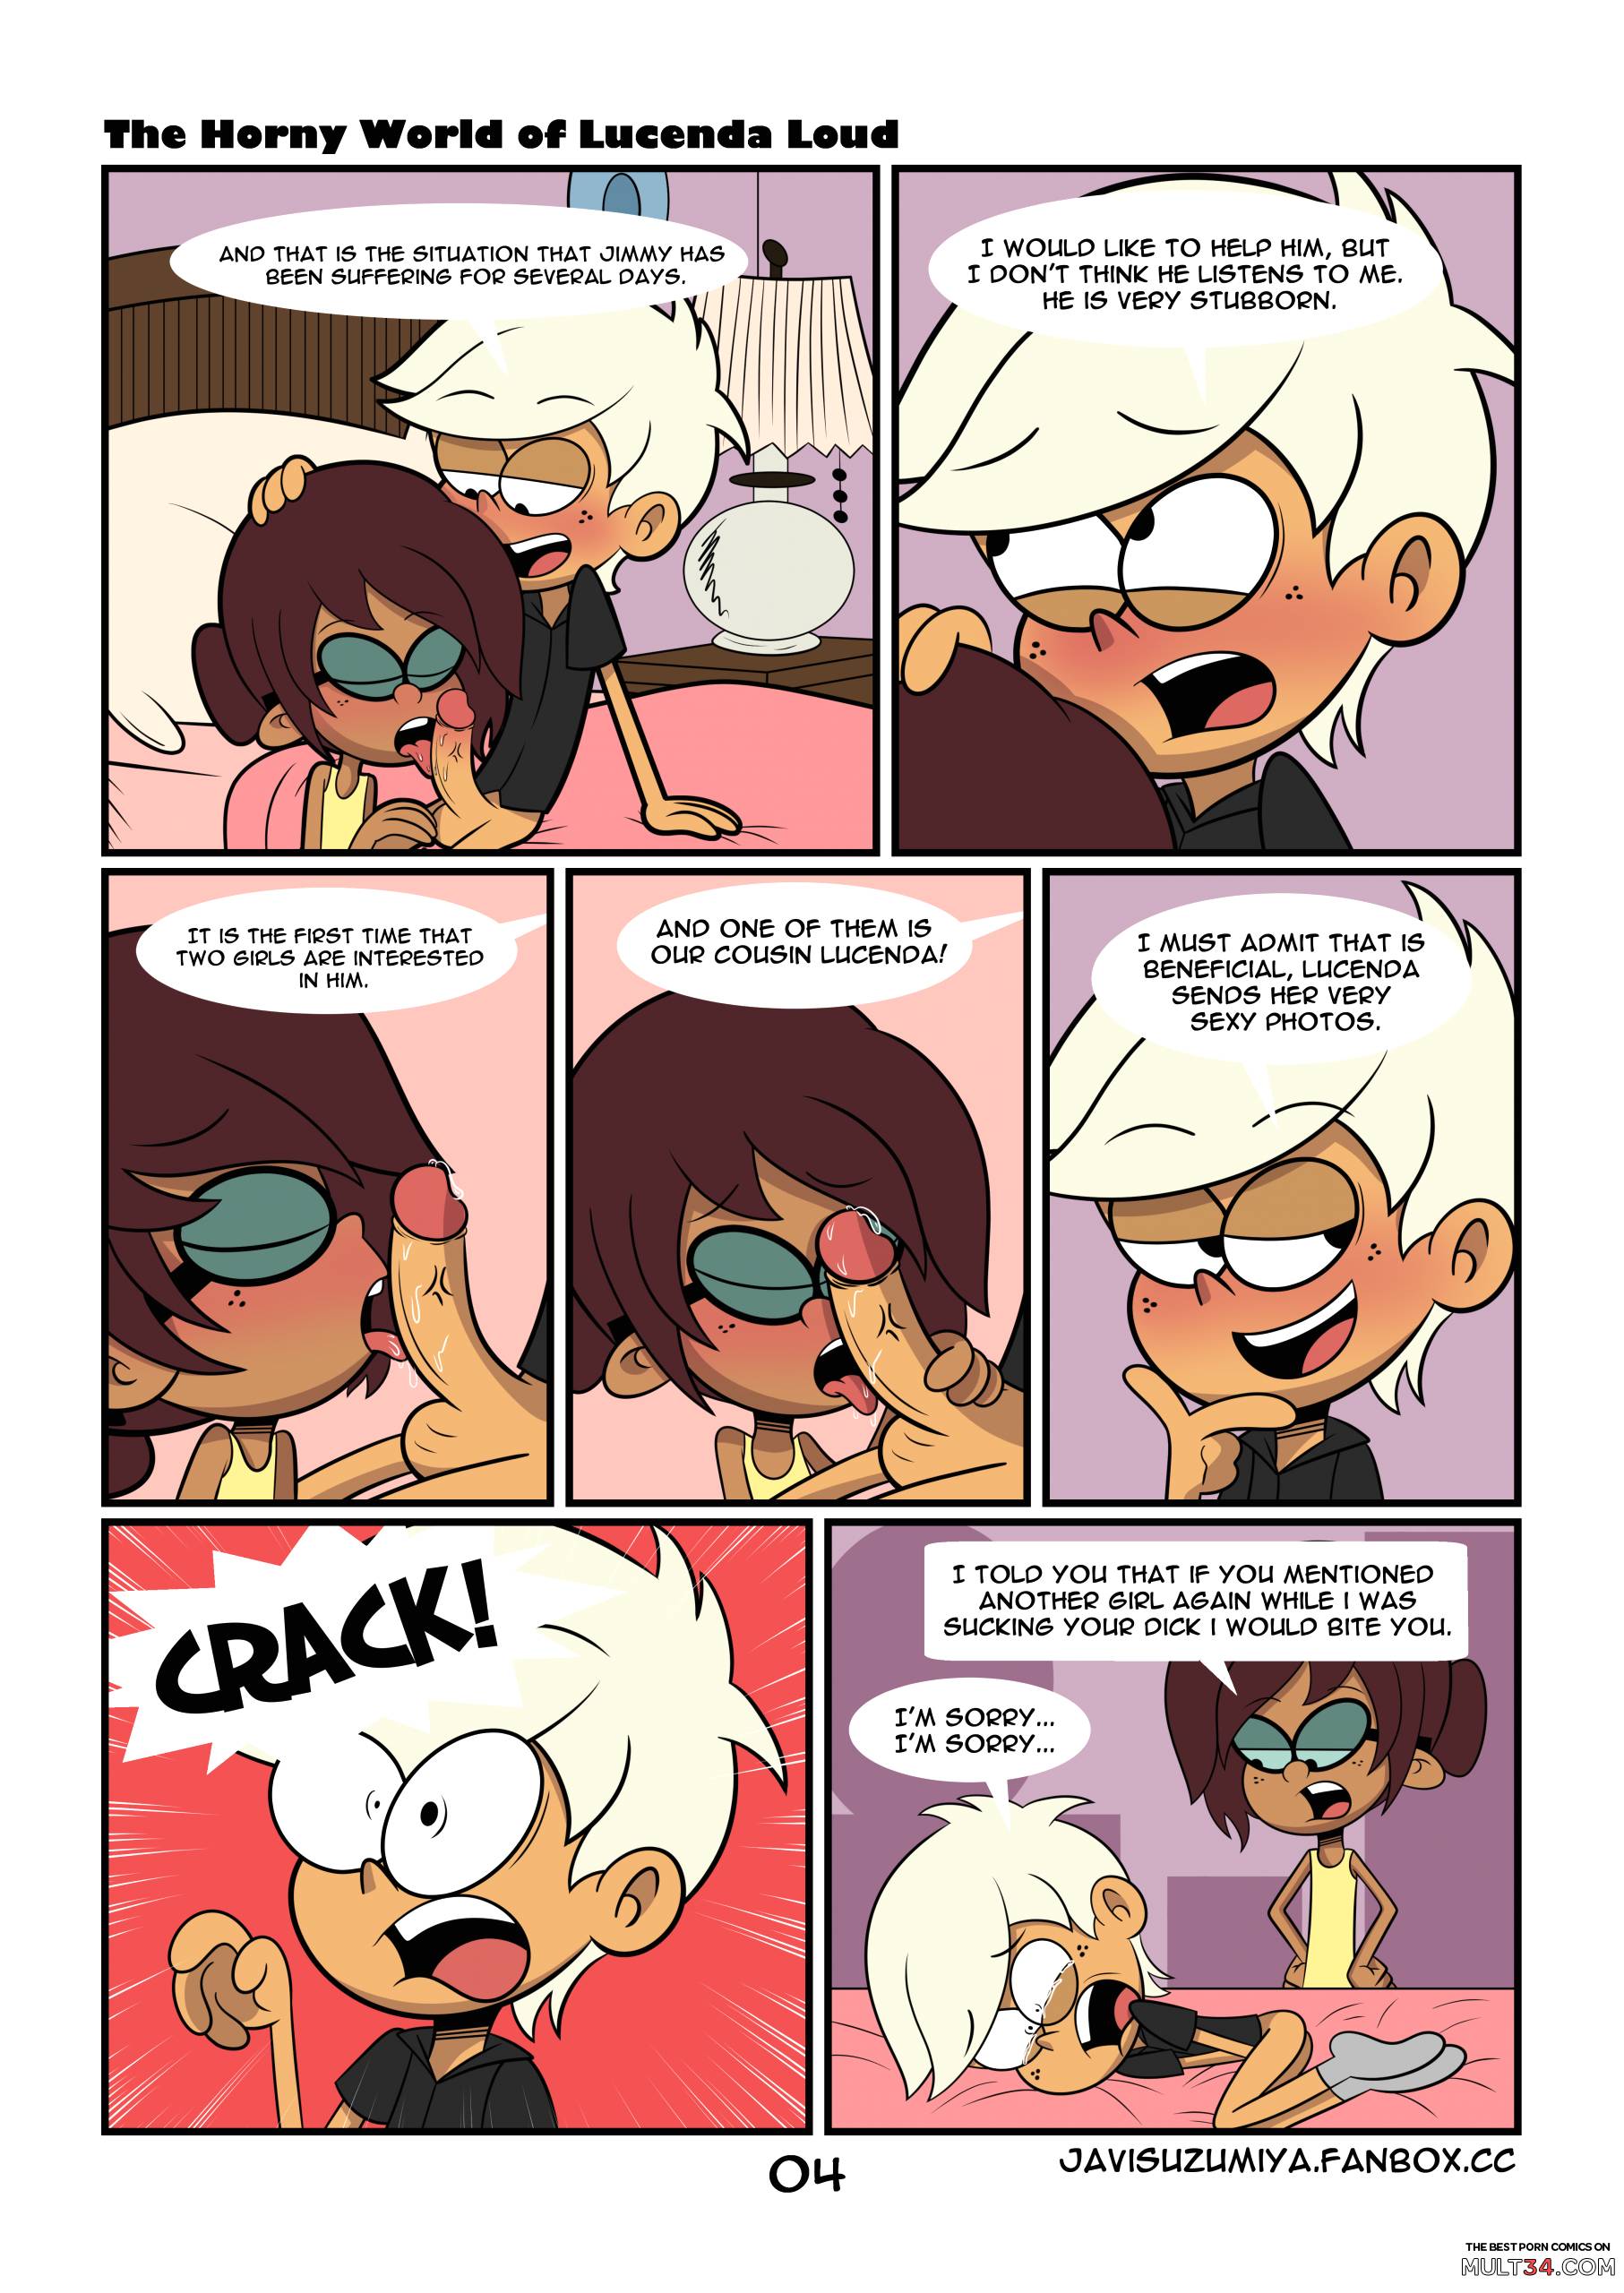 The Horny World of Lucenda Loud page 4